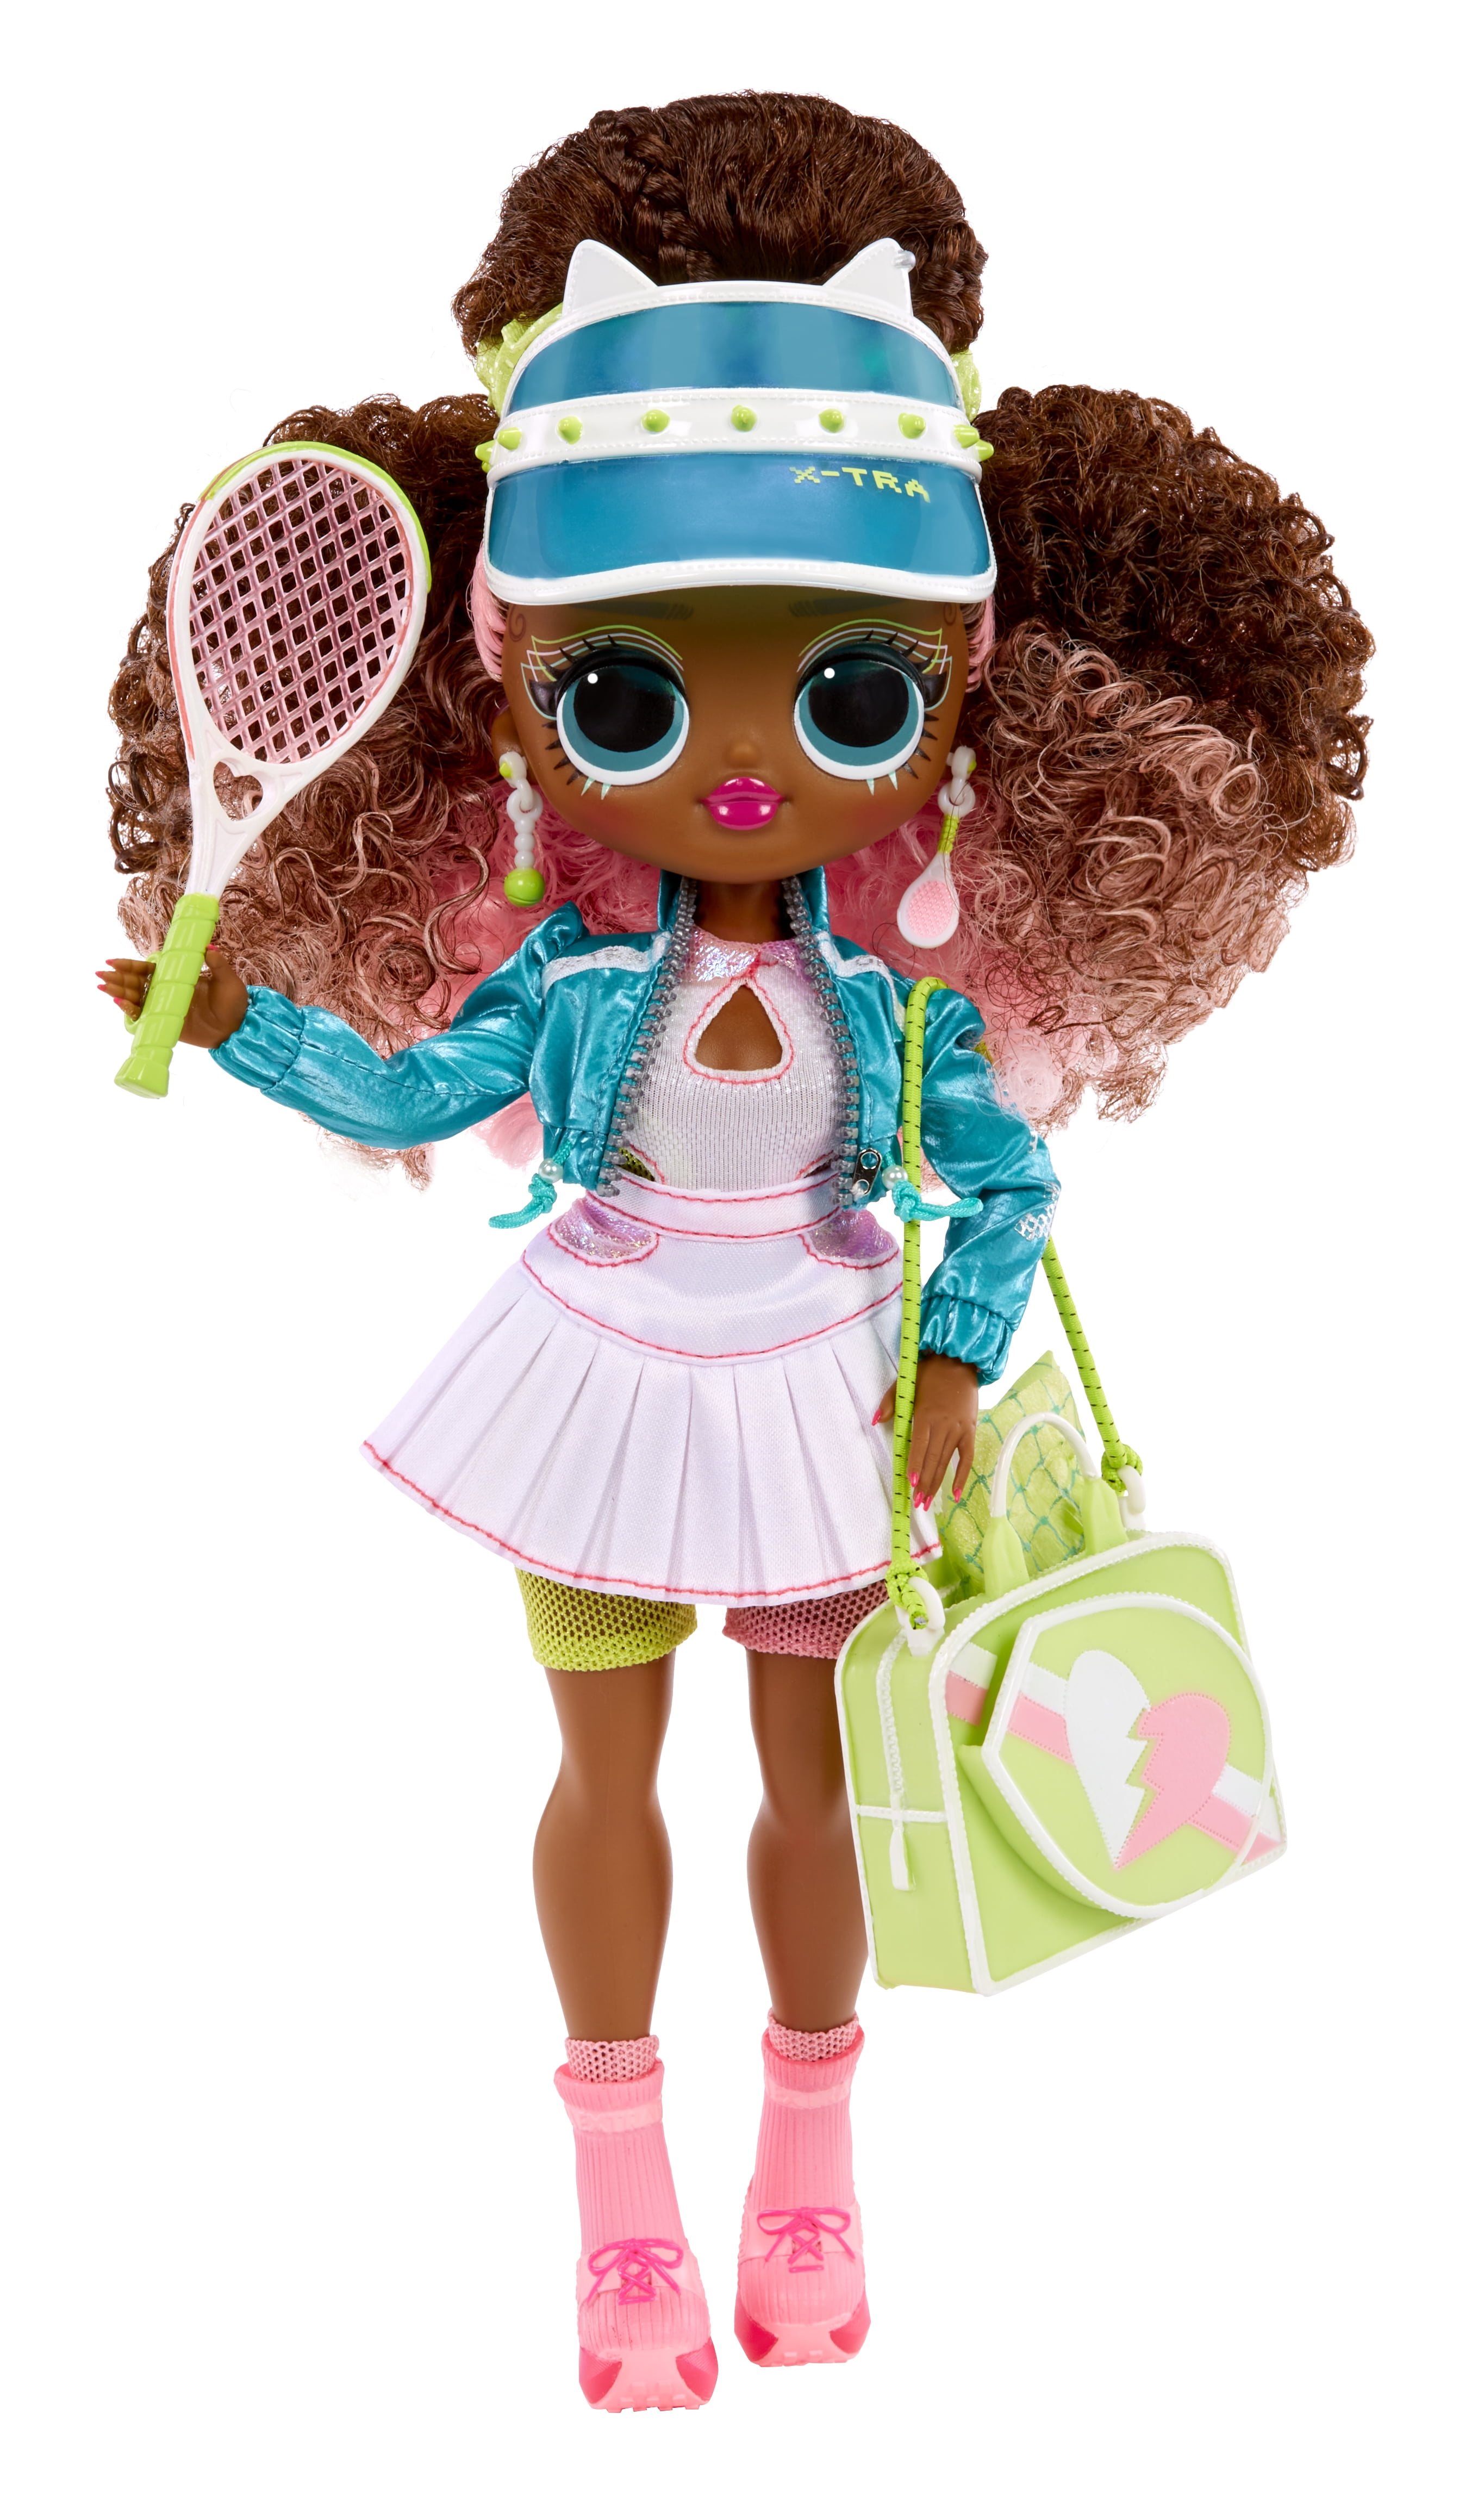 L.O.L Surprise! LOL Surprise OMG Sports Fashion Doll Court Cutie with 20 Surprises Including Multiple Fashion & Sports Accessories – Great Gift for Kids Ages 4+